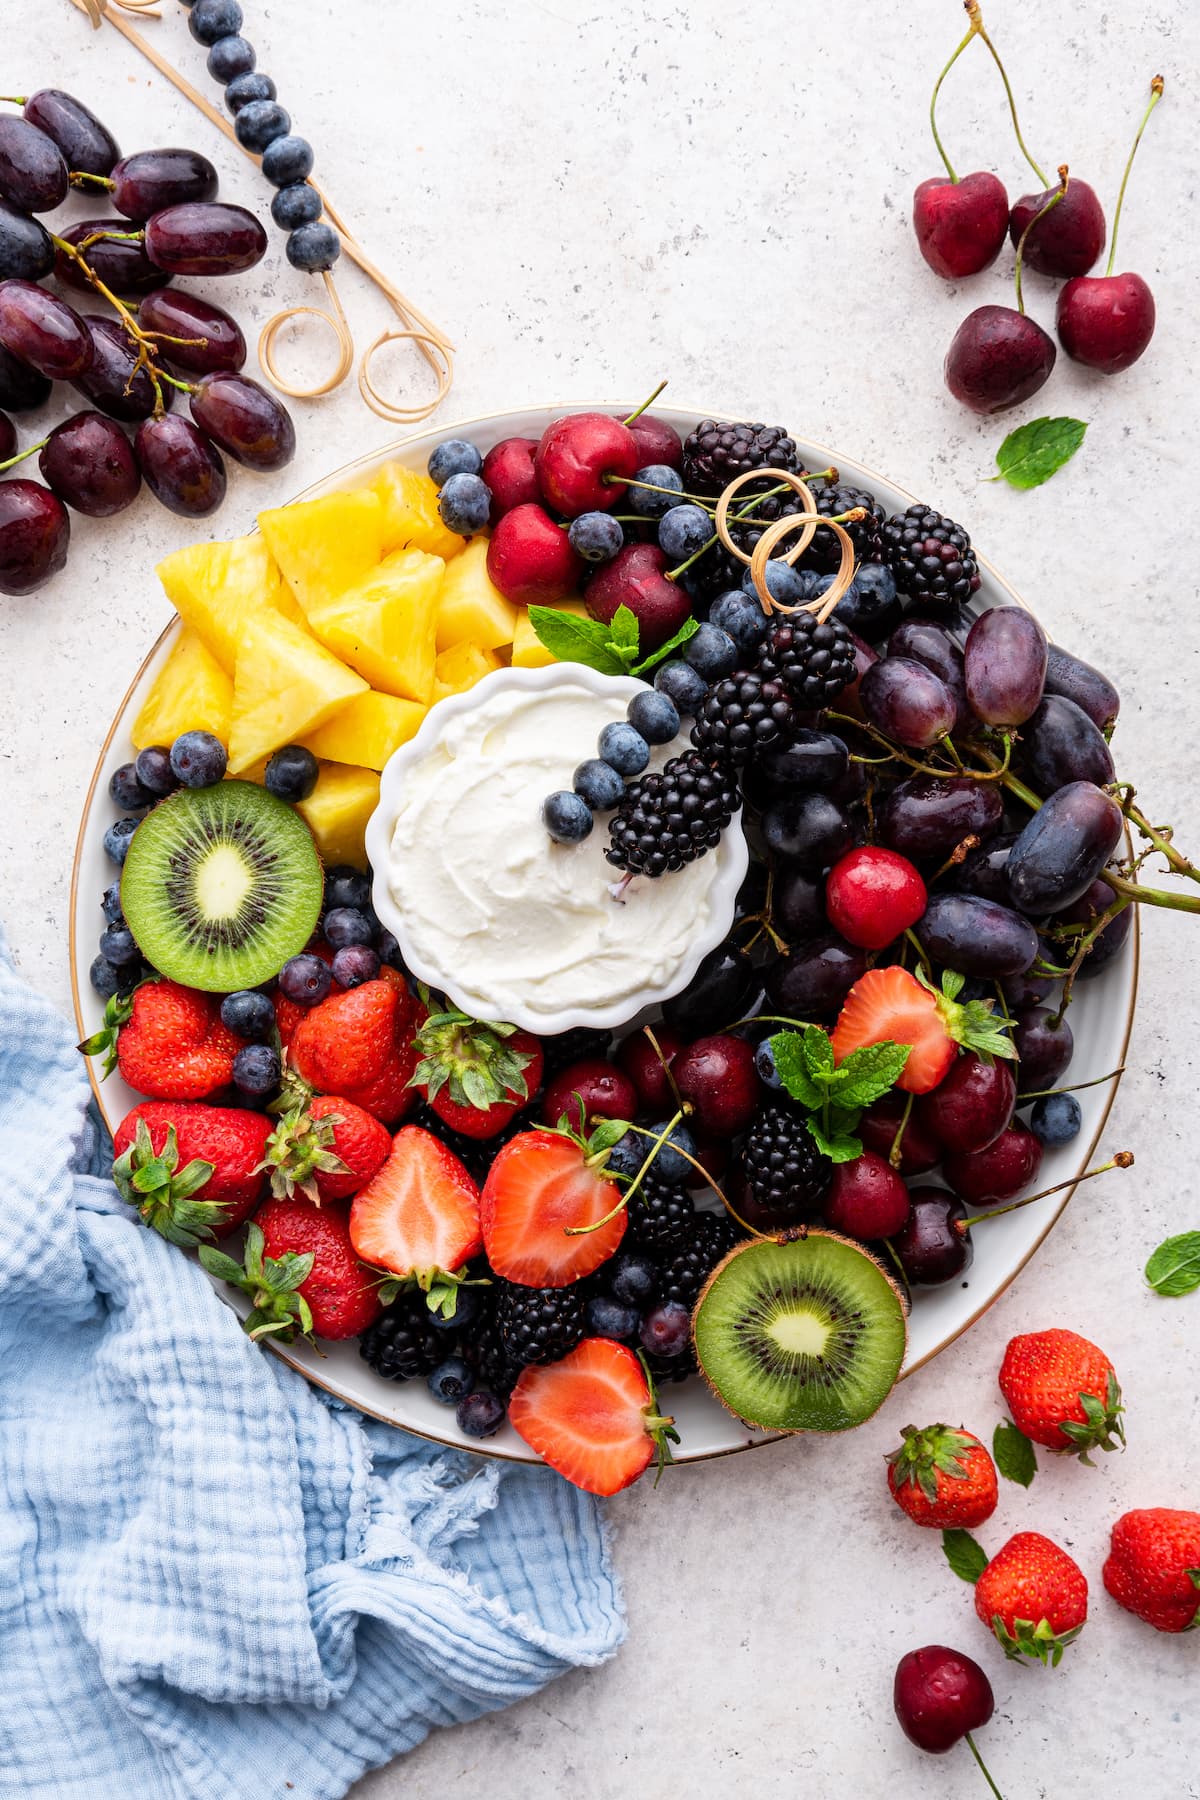 A white platter filled with a variety of fresh fruit with a yogurt fruit dip in the middle.